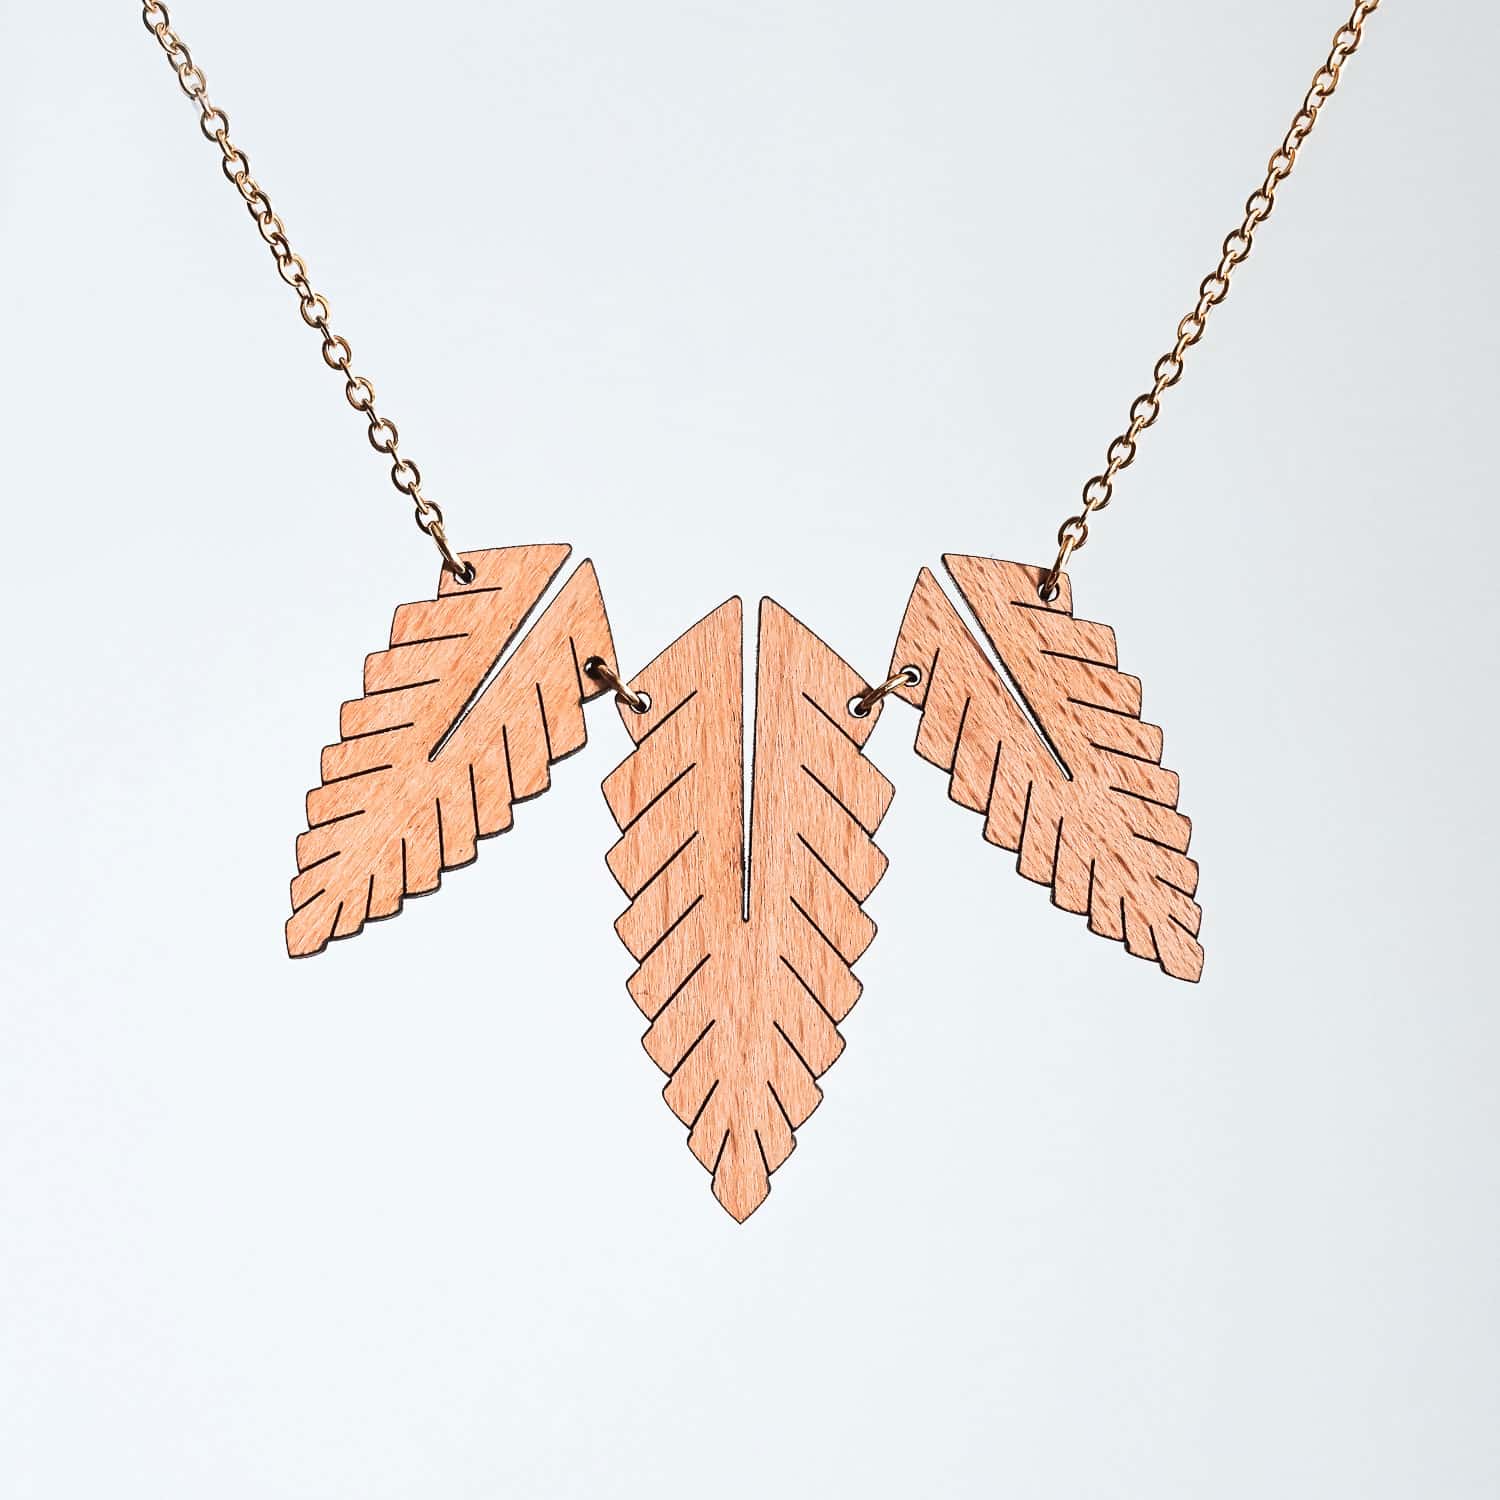 Foglia wooden necklace with golden chain